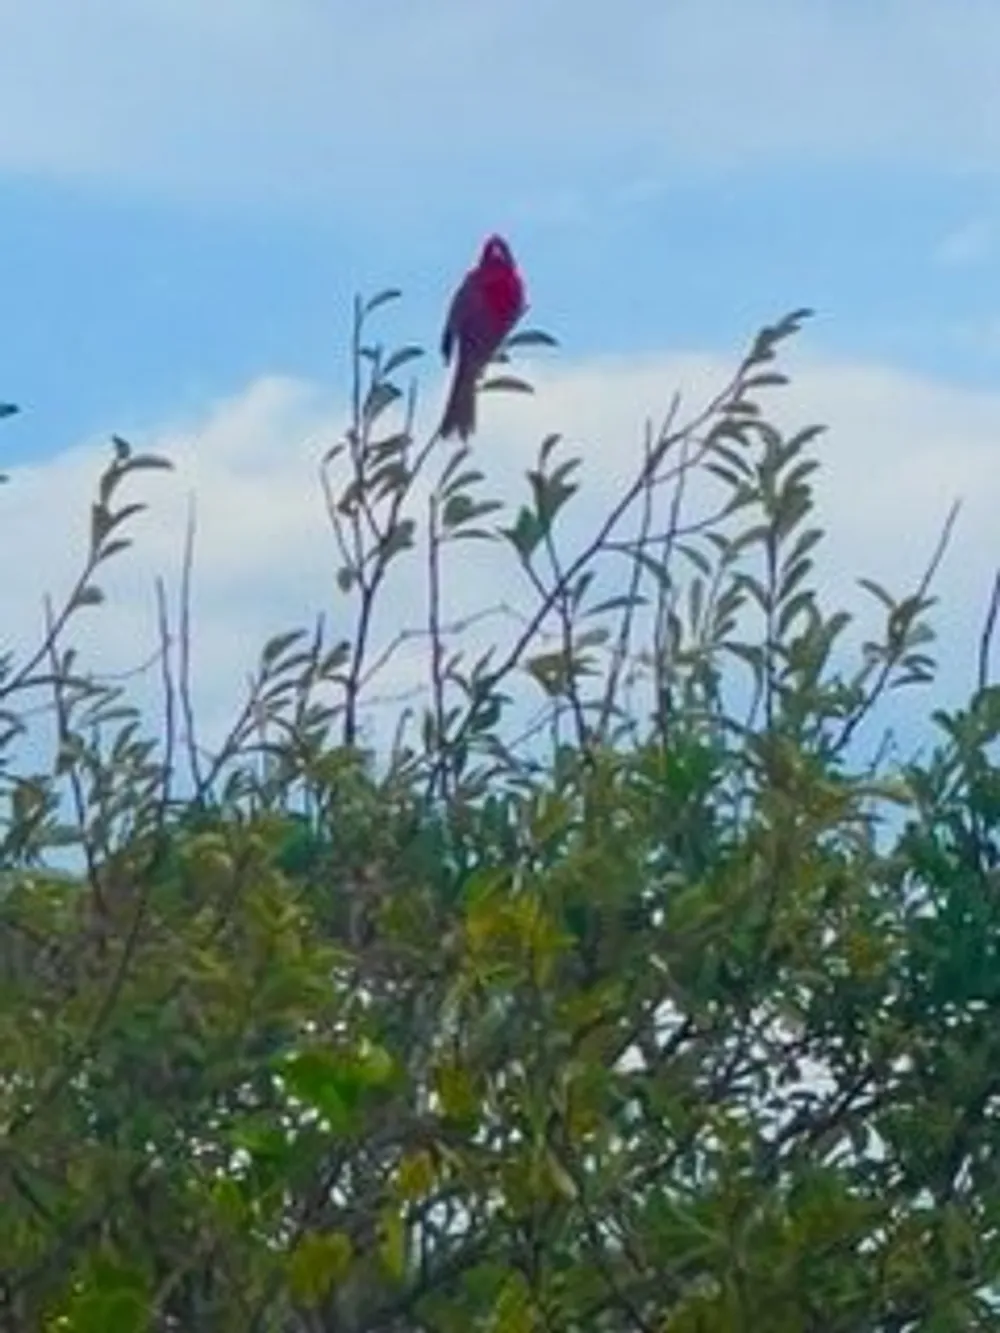 A vibrant red bird is perched atop the green foliage against a cloudy blue sky